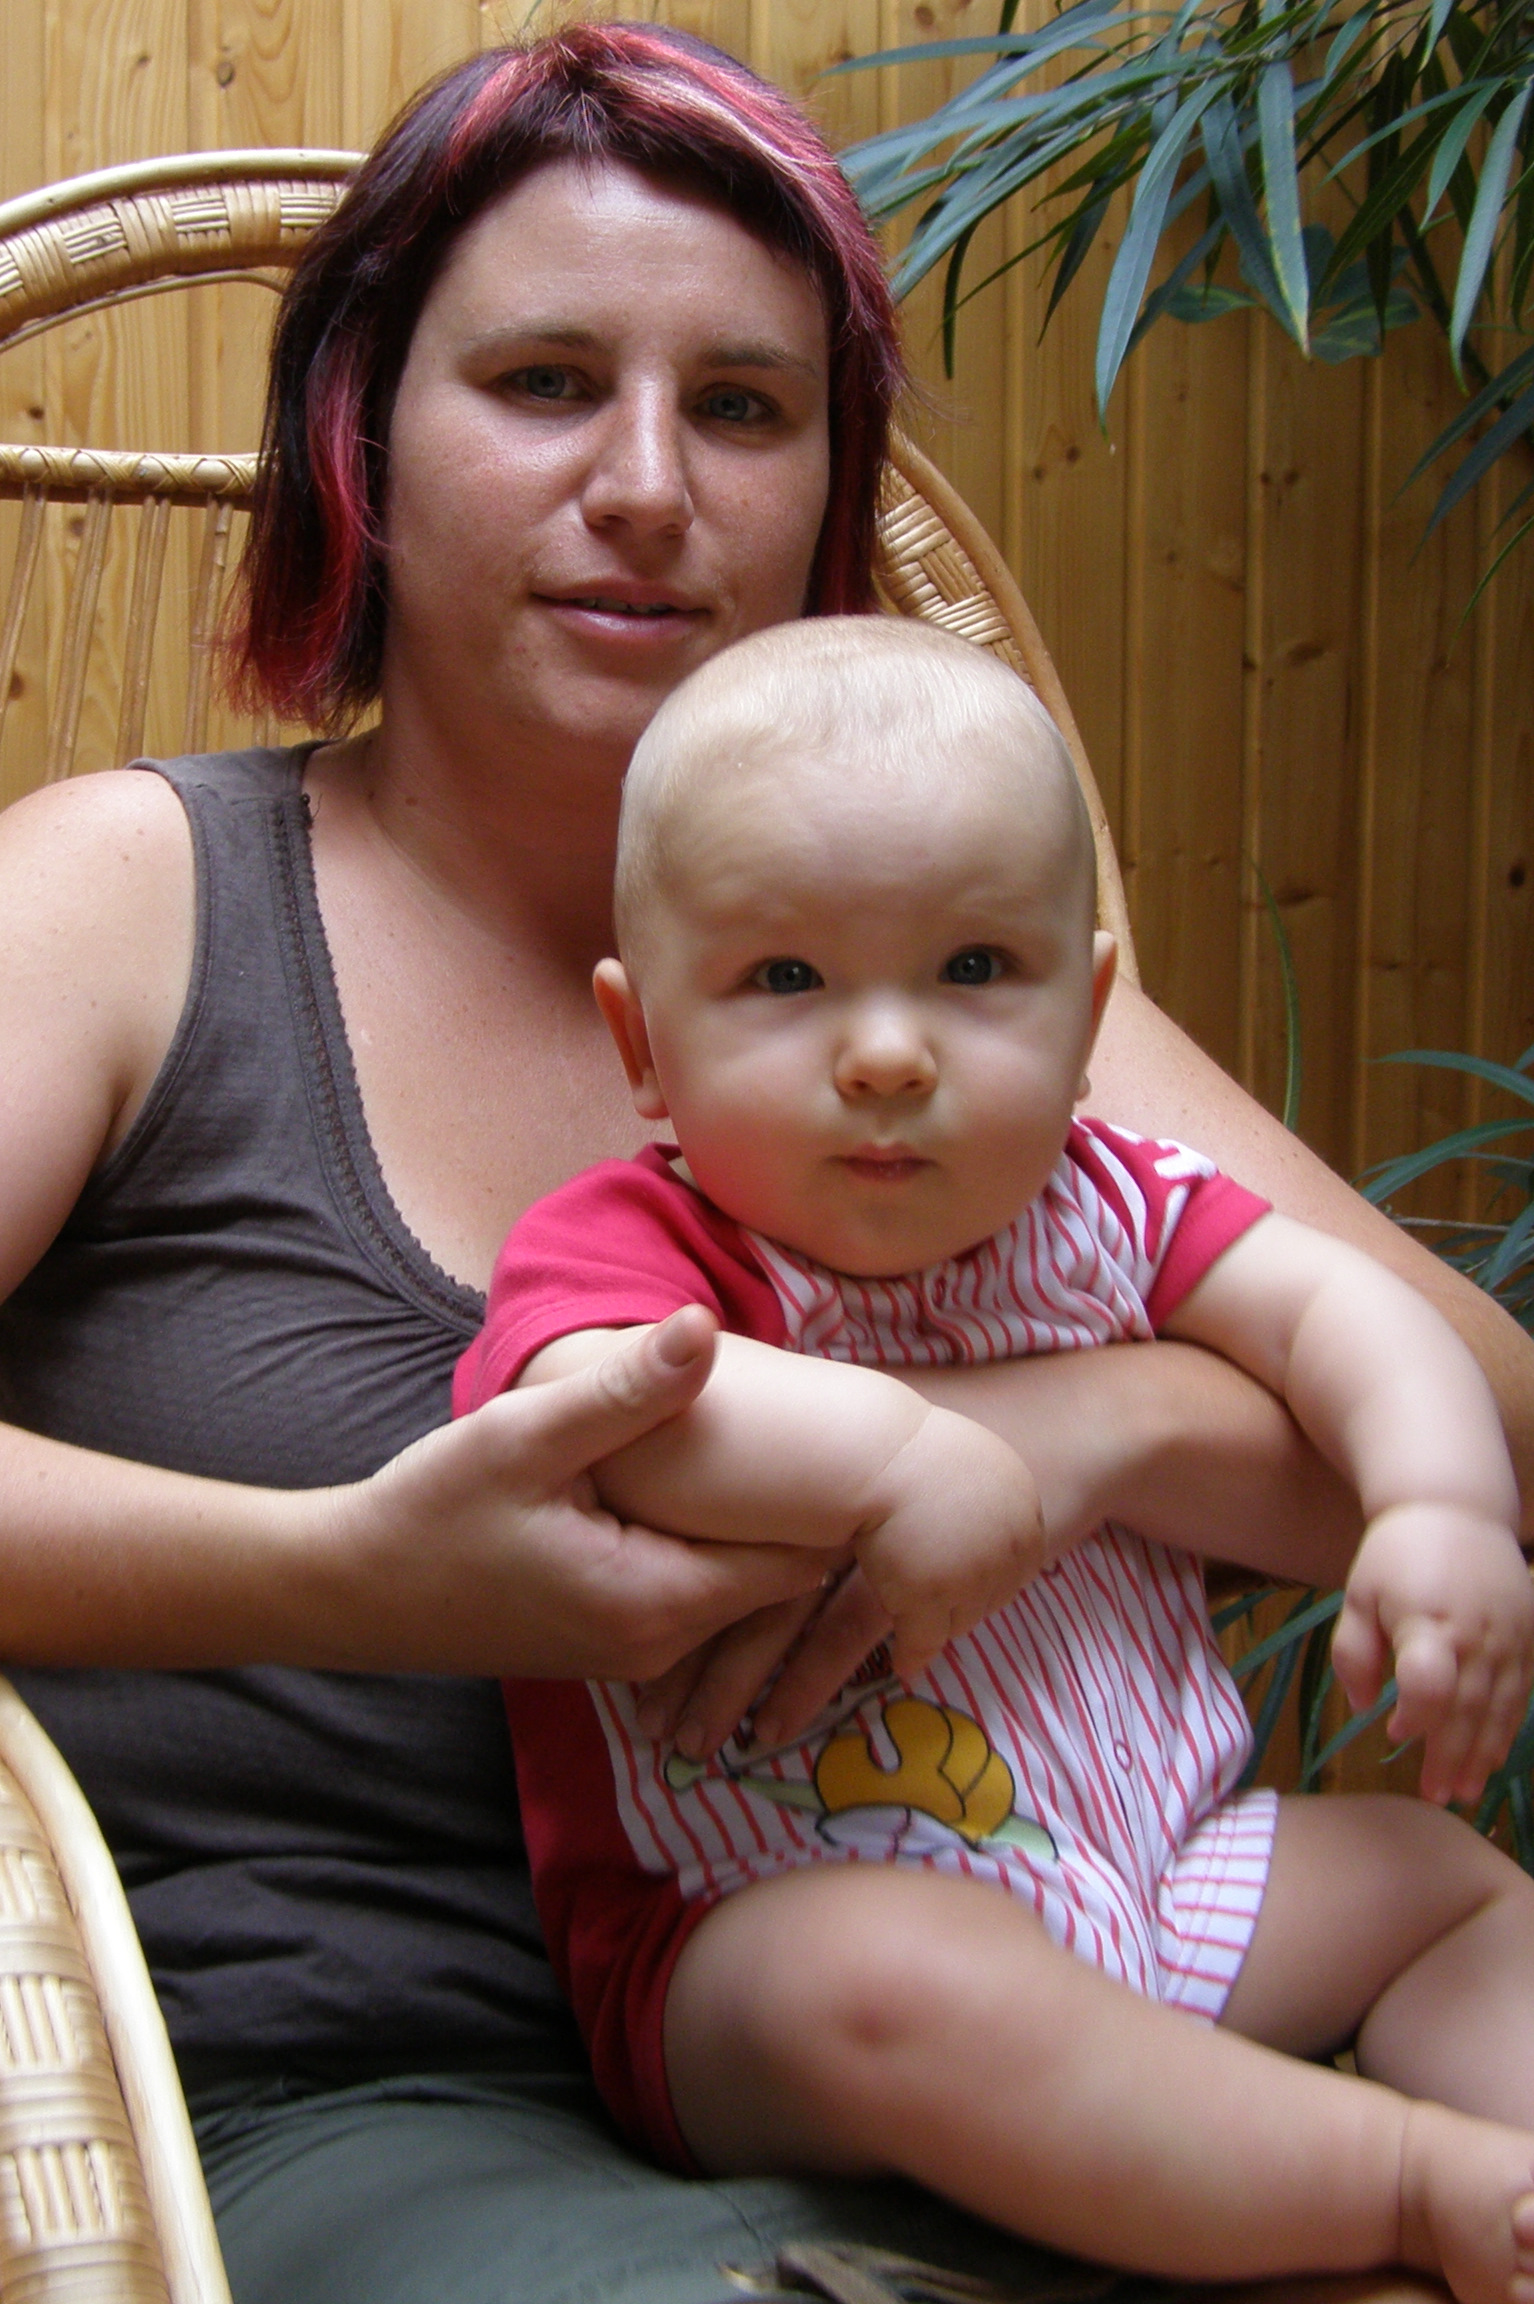 a woman with red hair holds a baby